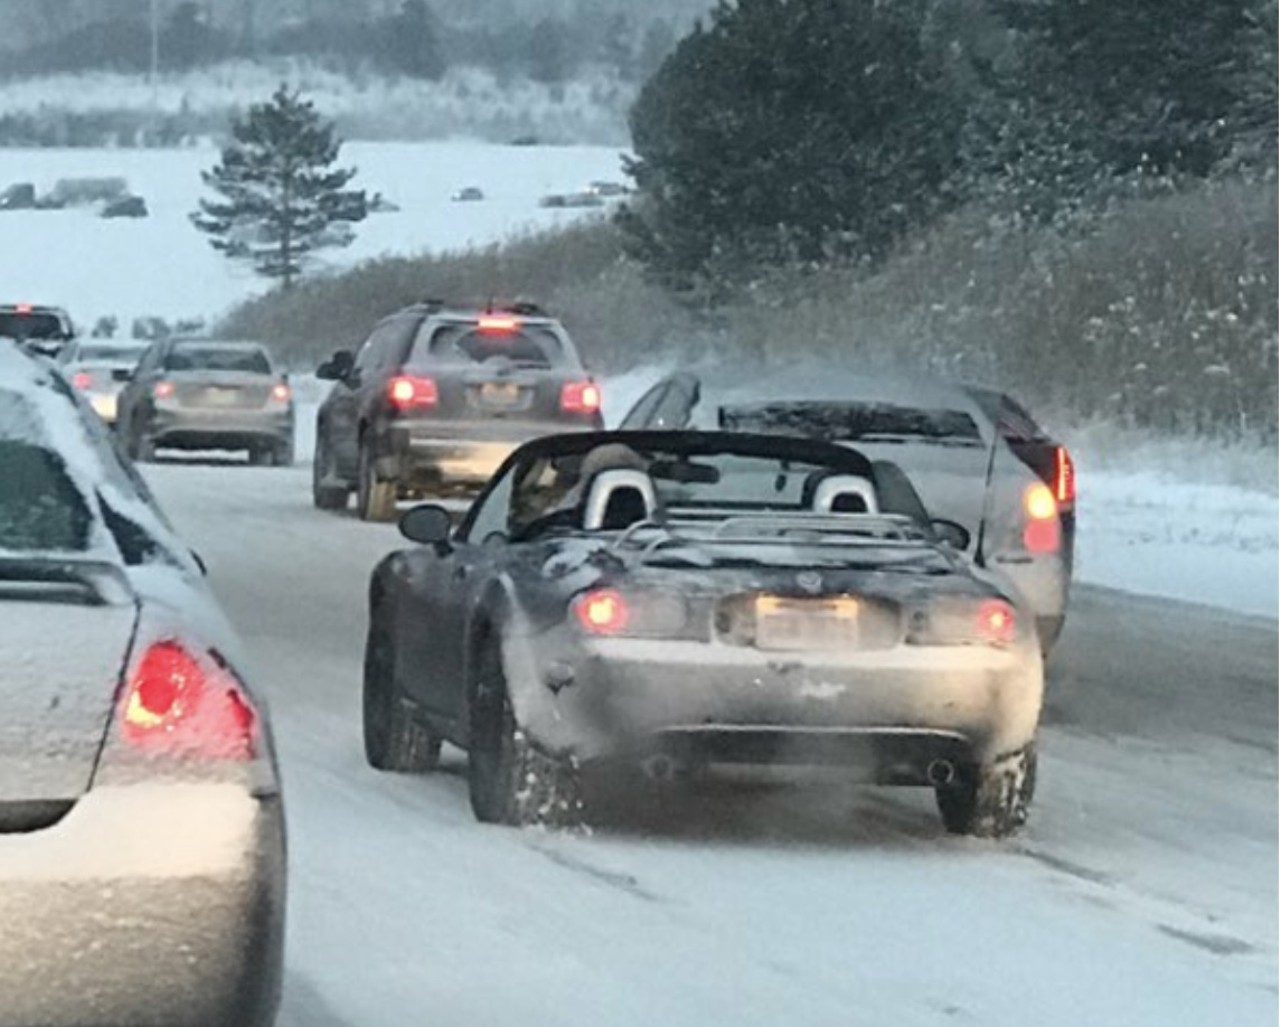 The All-Weather Driver
Cleveland is blessed with many things, year-round sunshine and good weather aren't two of them. So what do you do when you've got a convertible in Northeast Ohio? You drop that top even in meteorological conditions that necessitate road salt and ice scrapers.